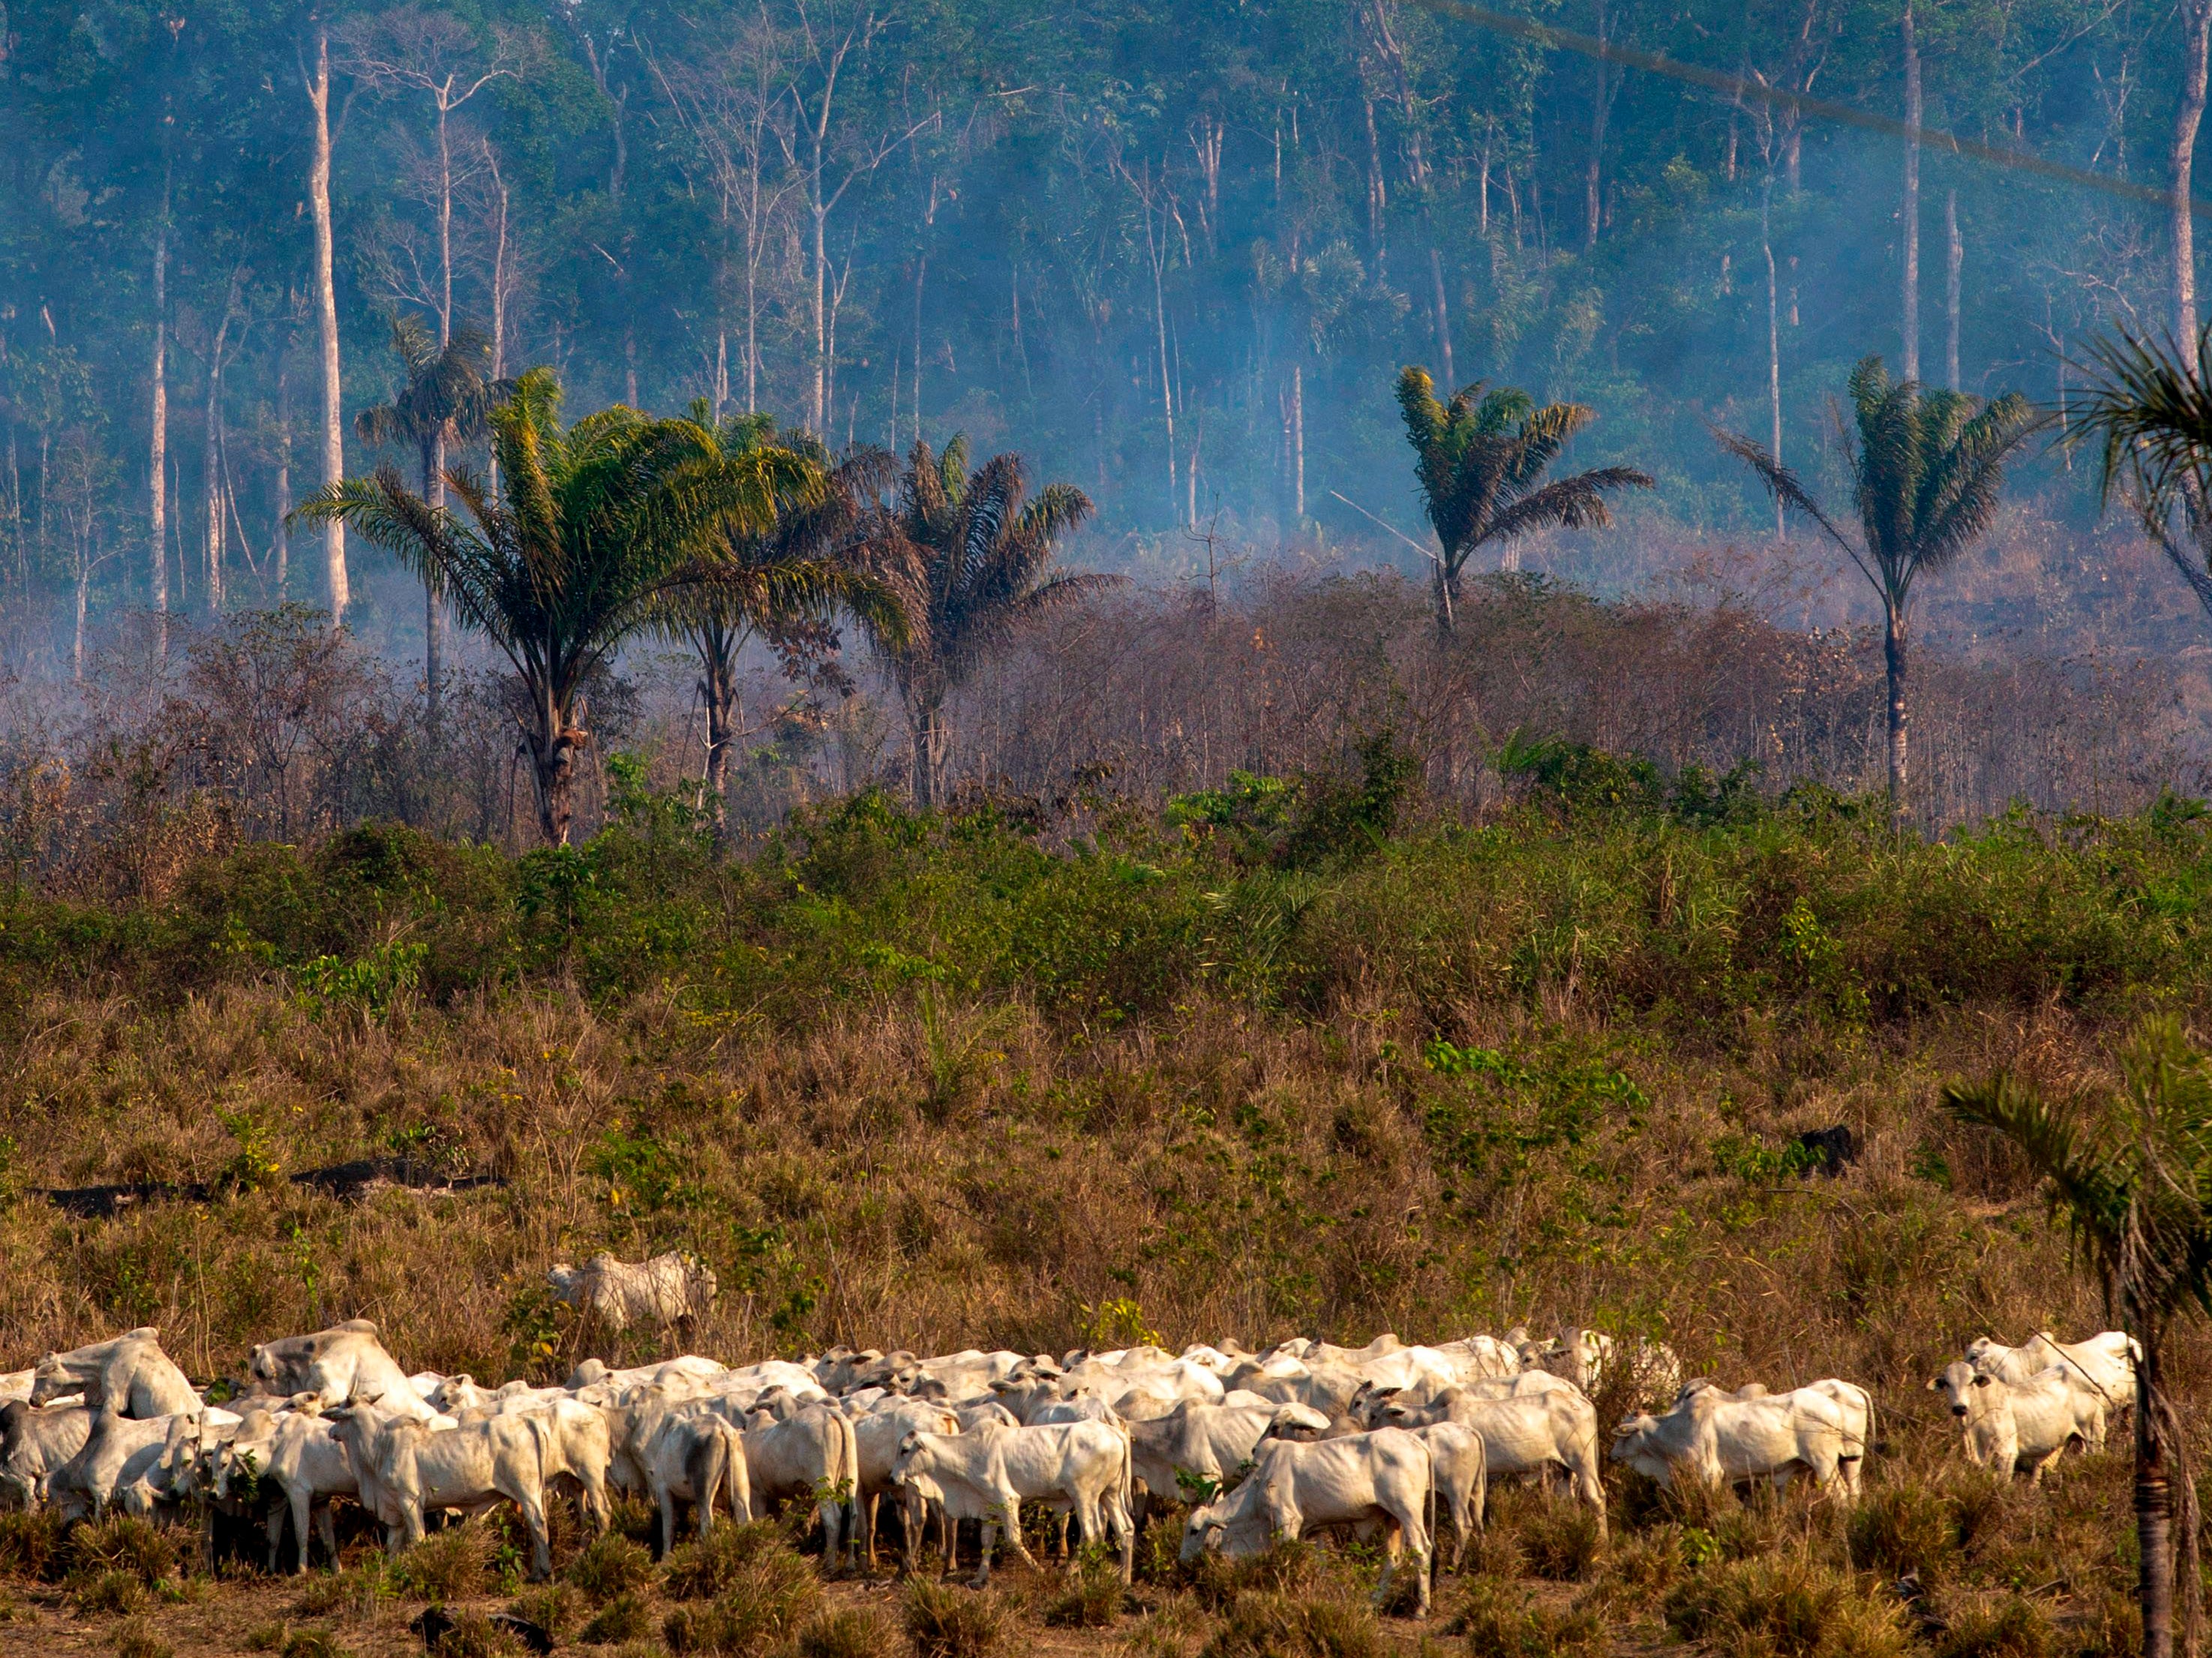 Countries are promising to tackle deforestation